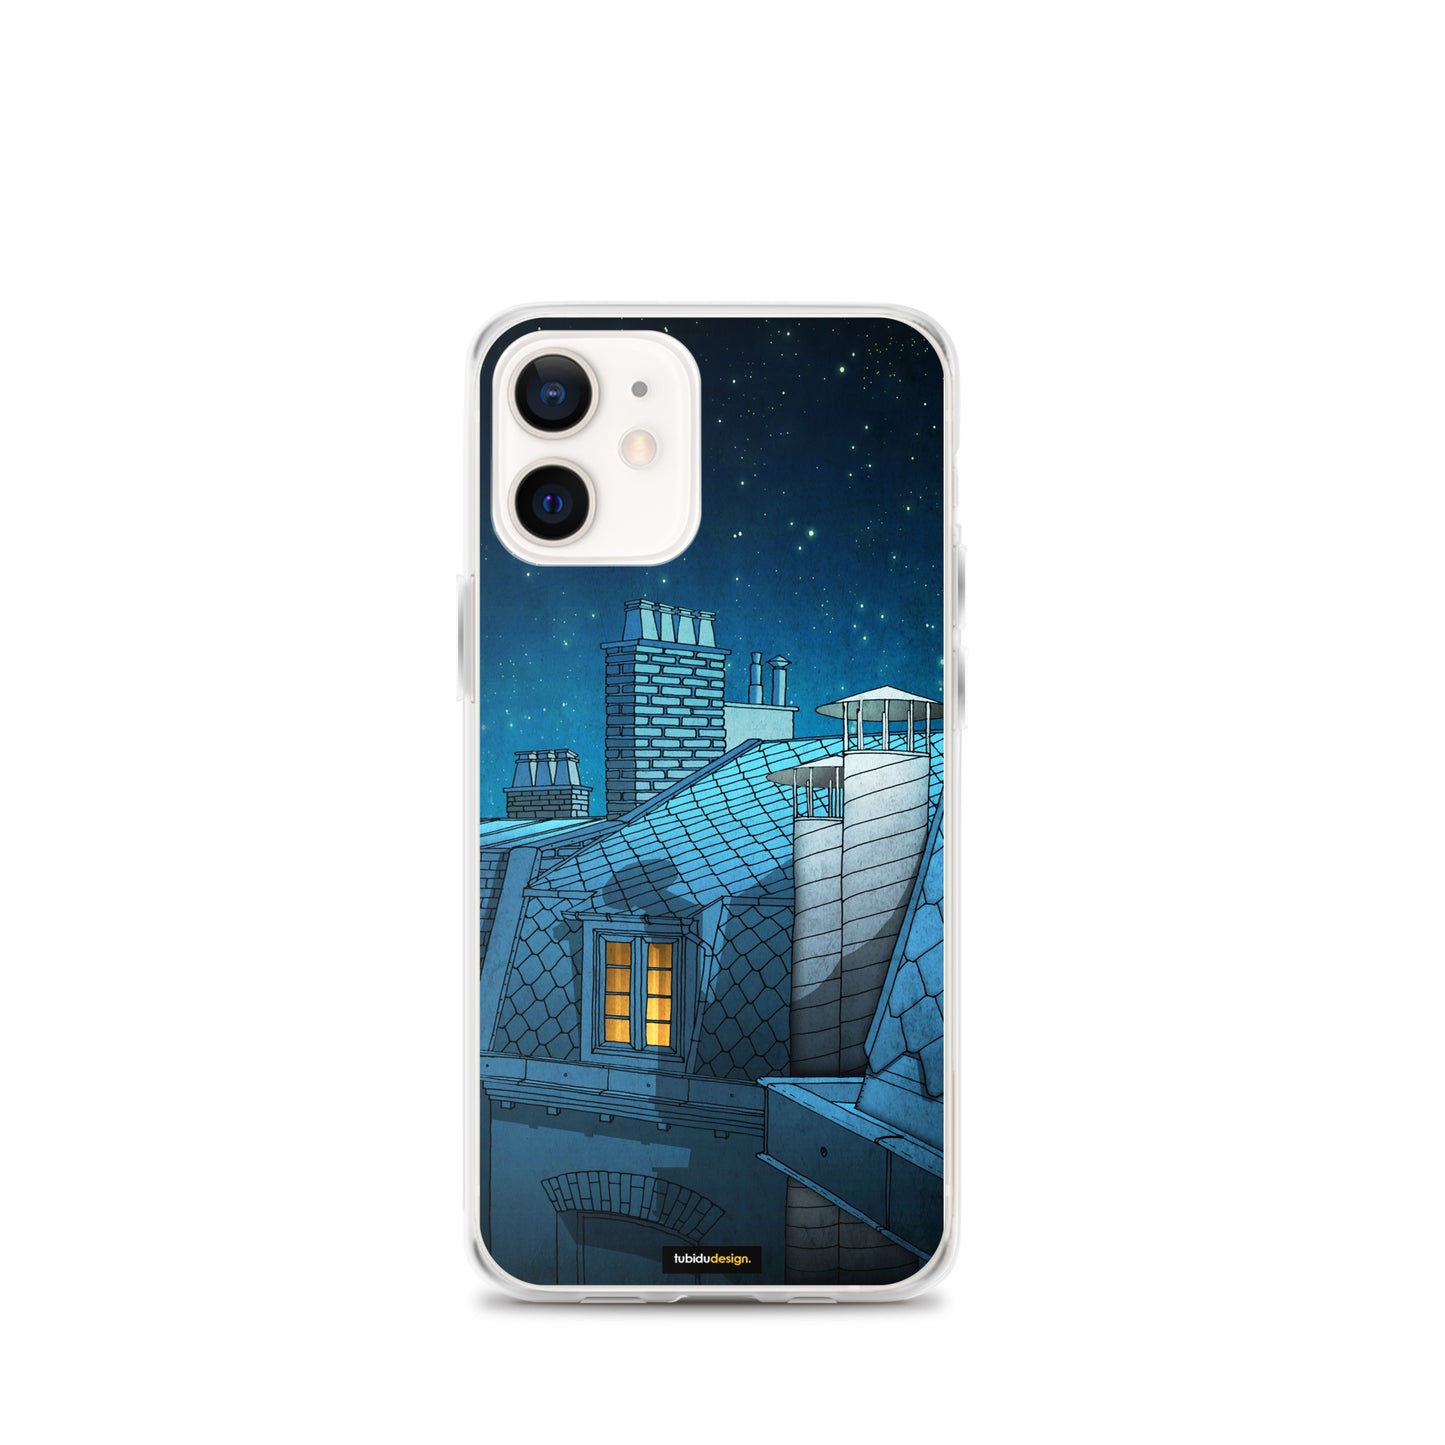 Dreaming a dream - Illustrated iPhone Case